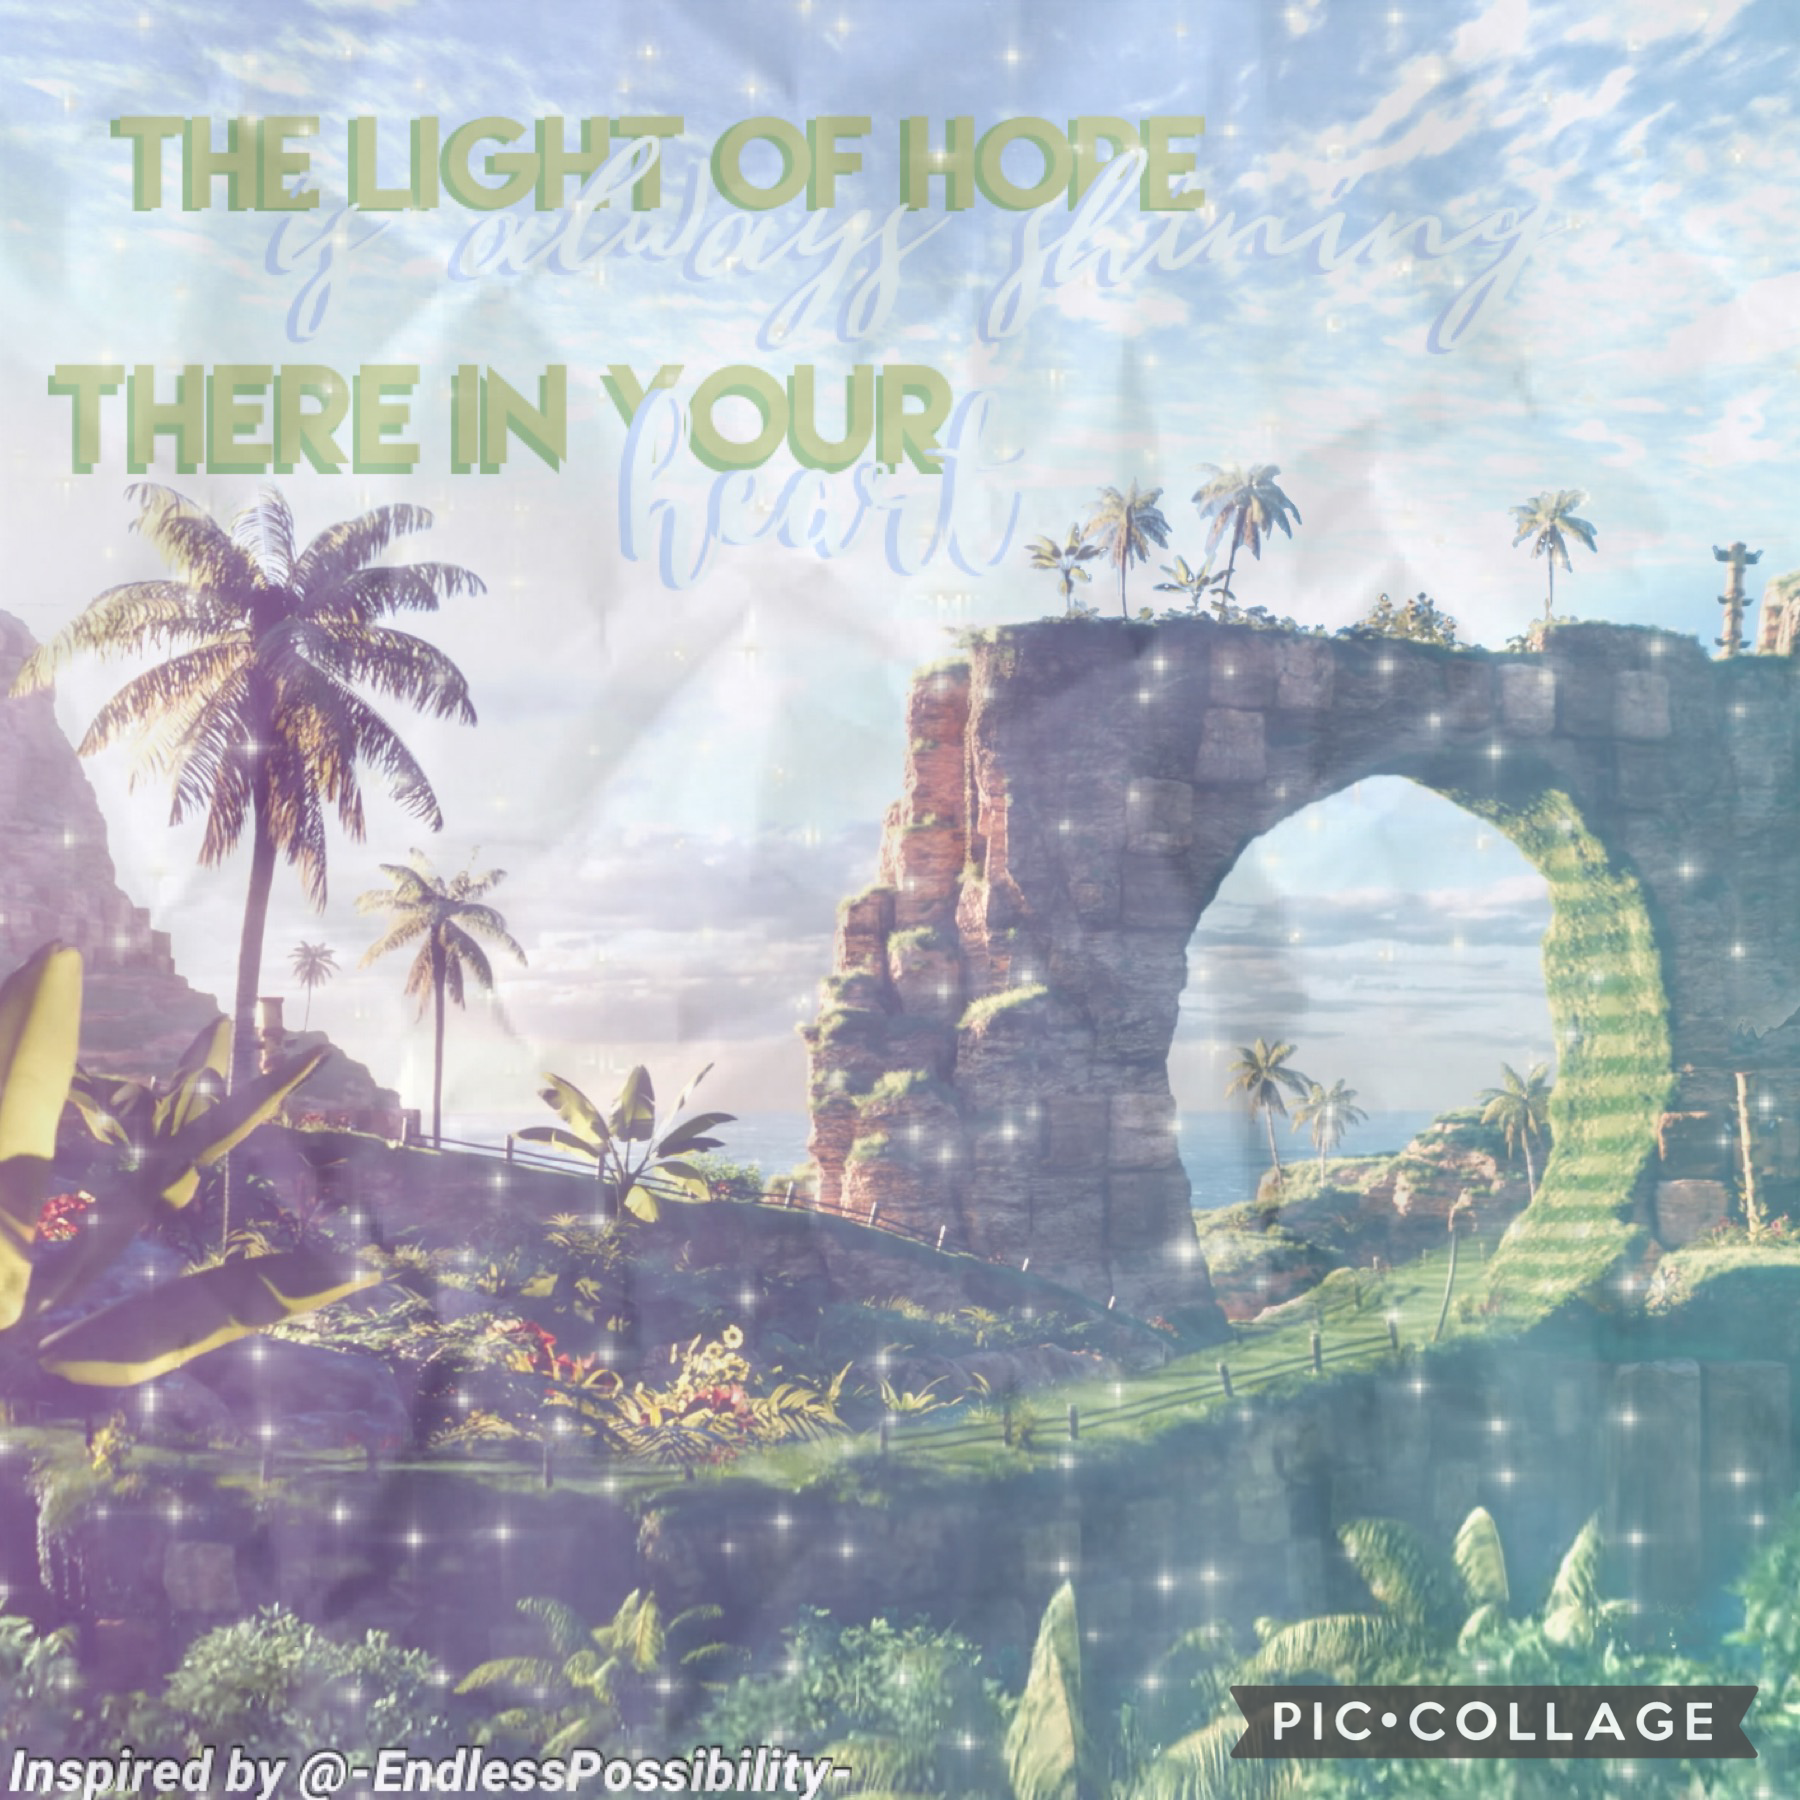 💙⚡️🔥🧊tap🧊🔥⚡️💙
Sorry if it's hard to read, but it says "The light of hope is always shining there in your heart", its a lyric from Light of Hope from the credits of SEGA's 2017 Sonic Forces